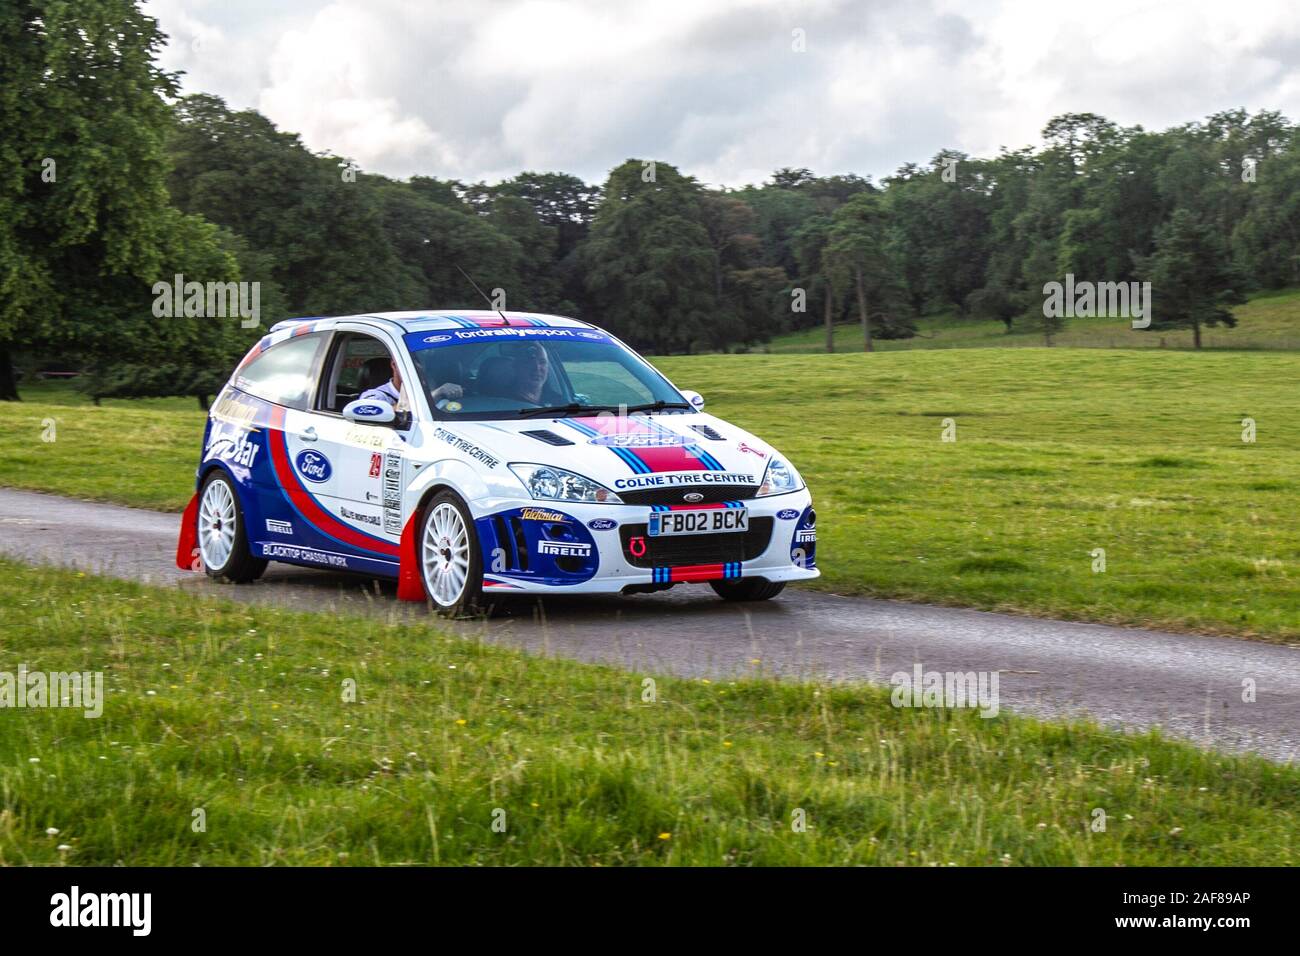 2002 Ford Focus St170 Martini rally car; Classic cars, historics, cherished, old timers, collectable restored vintage veteran, heritage vehicles of yesteryear arriving for the Mark Woodward historical motoring event at Leighton Hall, Carnforth, UK Stock Photo